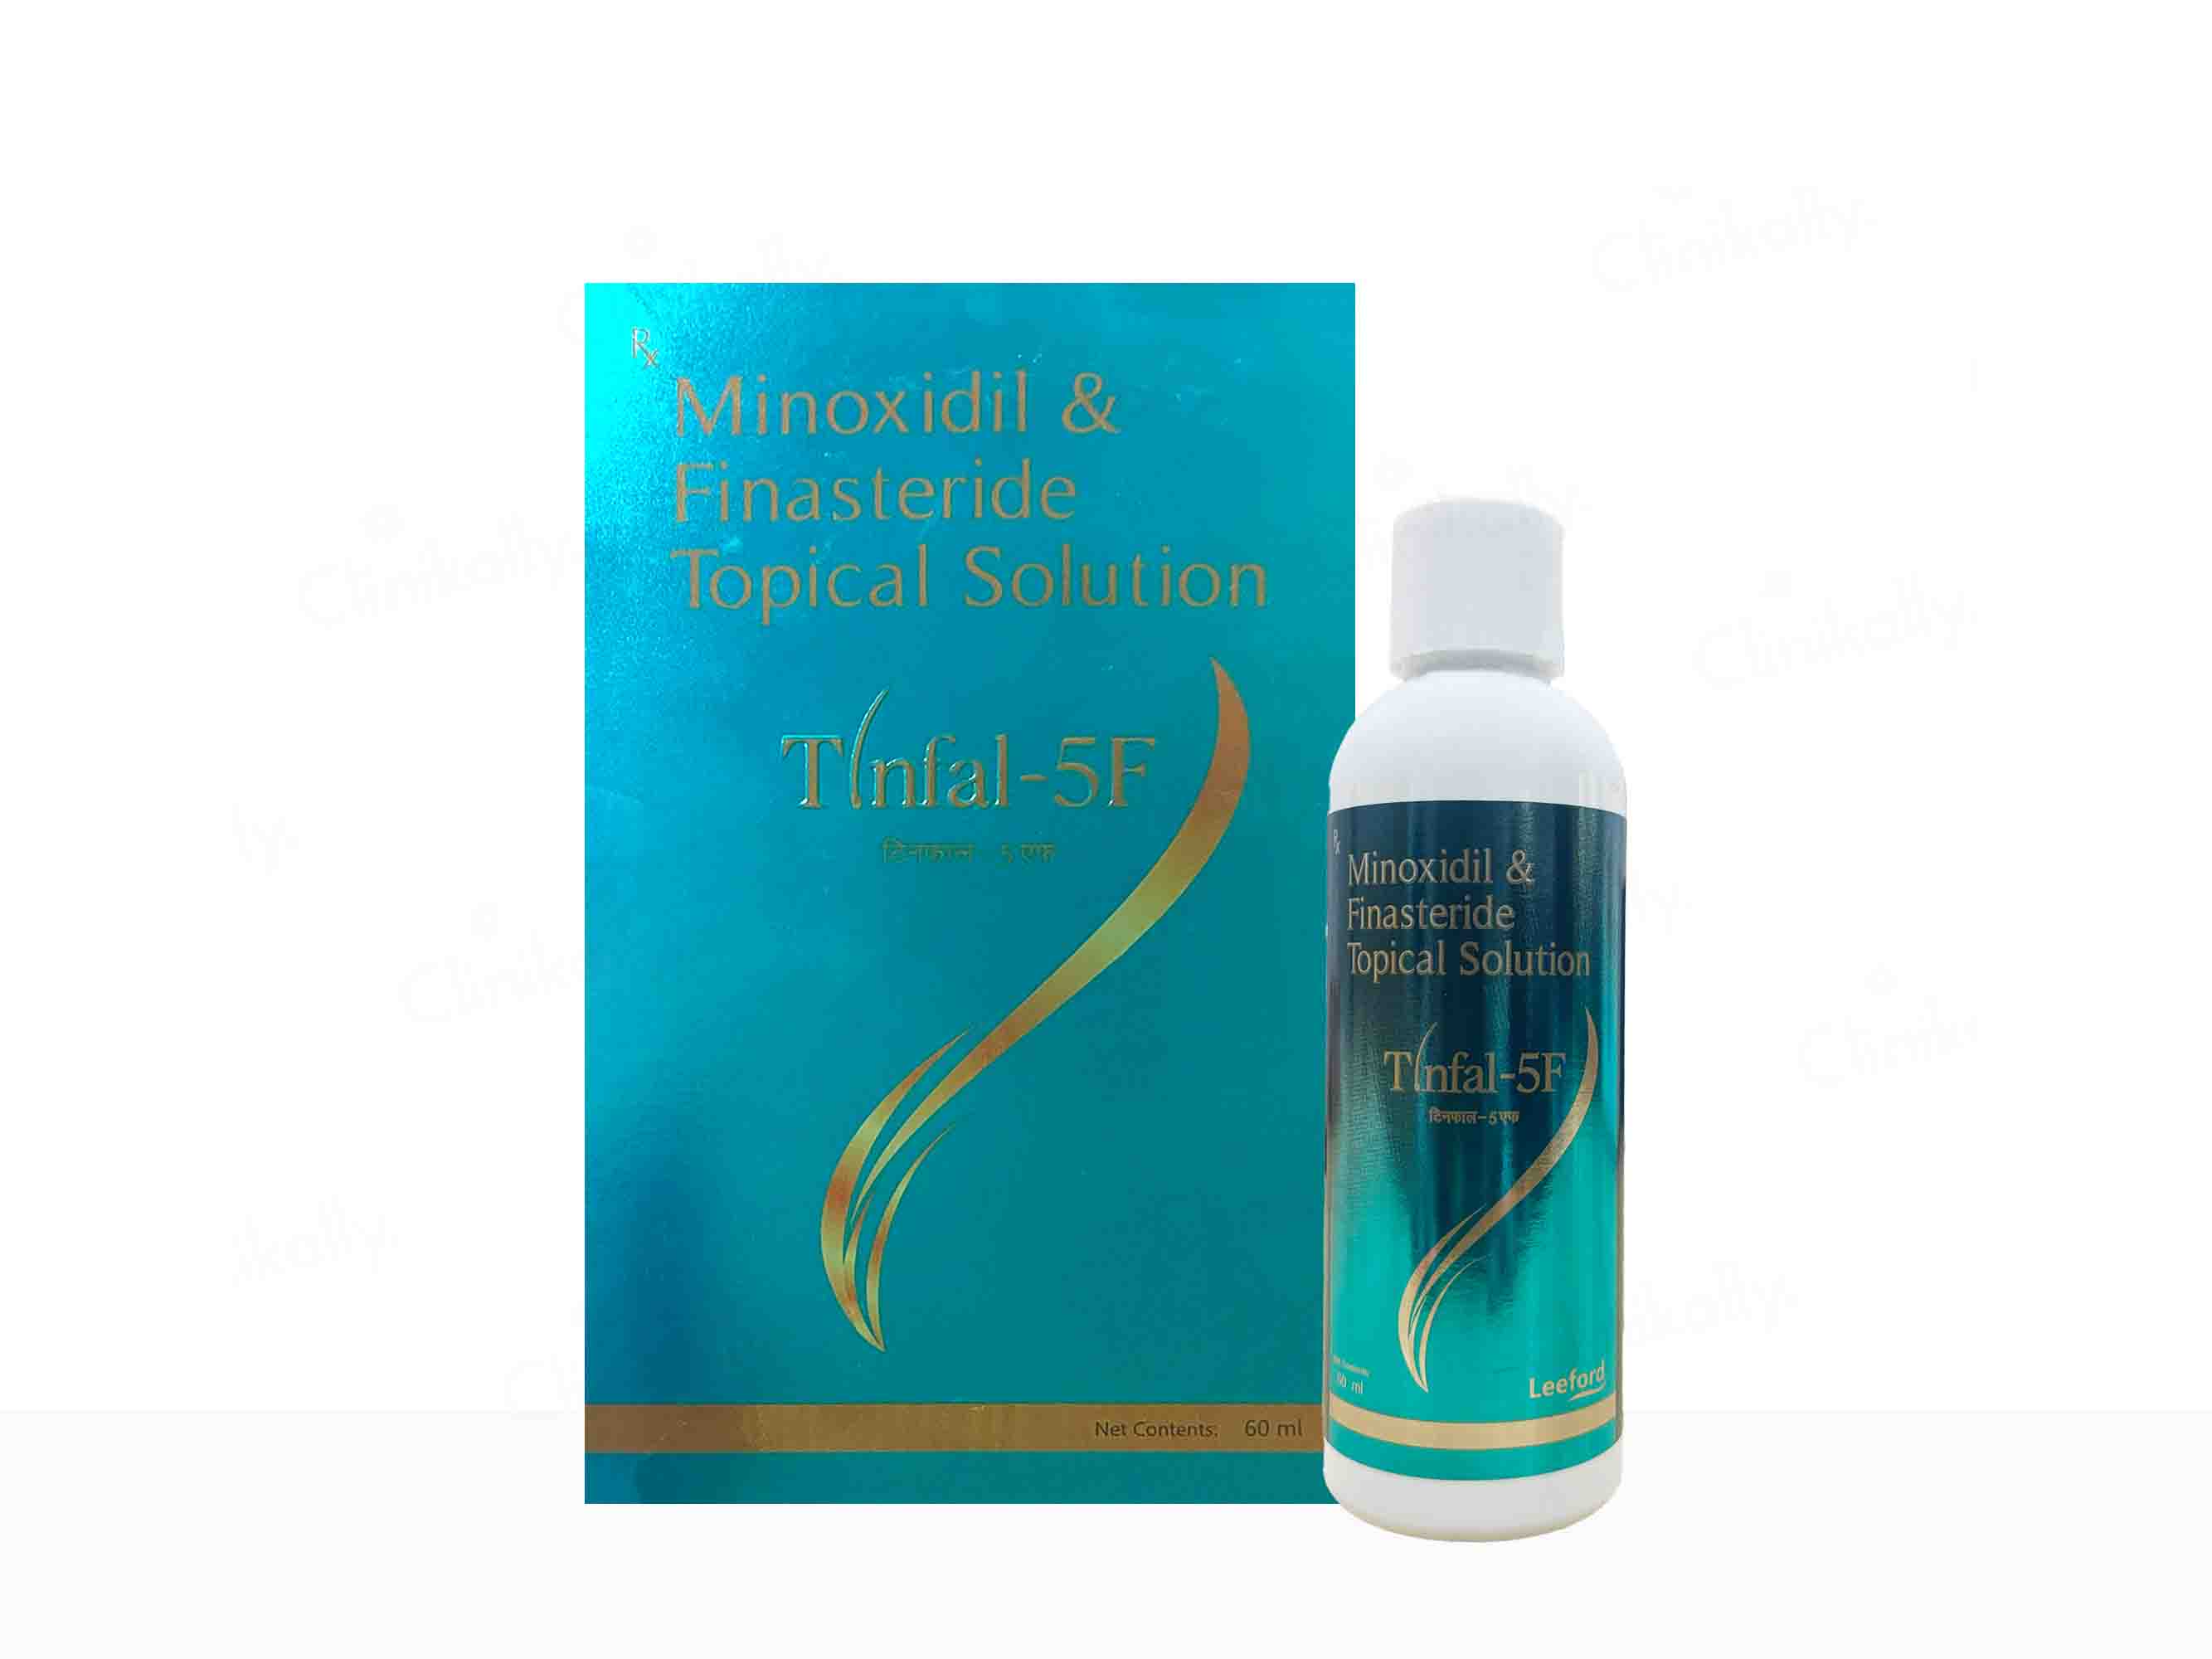 Tinfal-5F Topical Solution